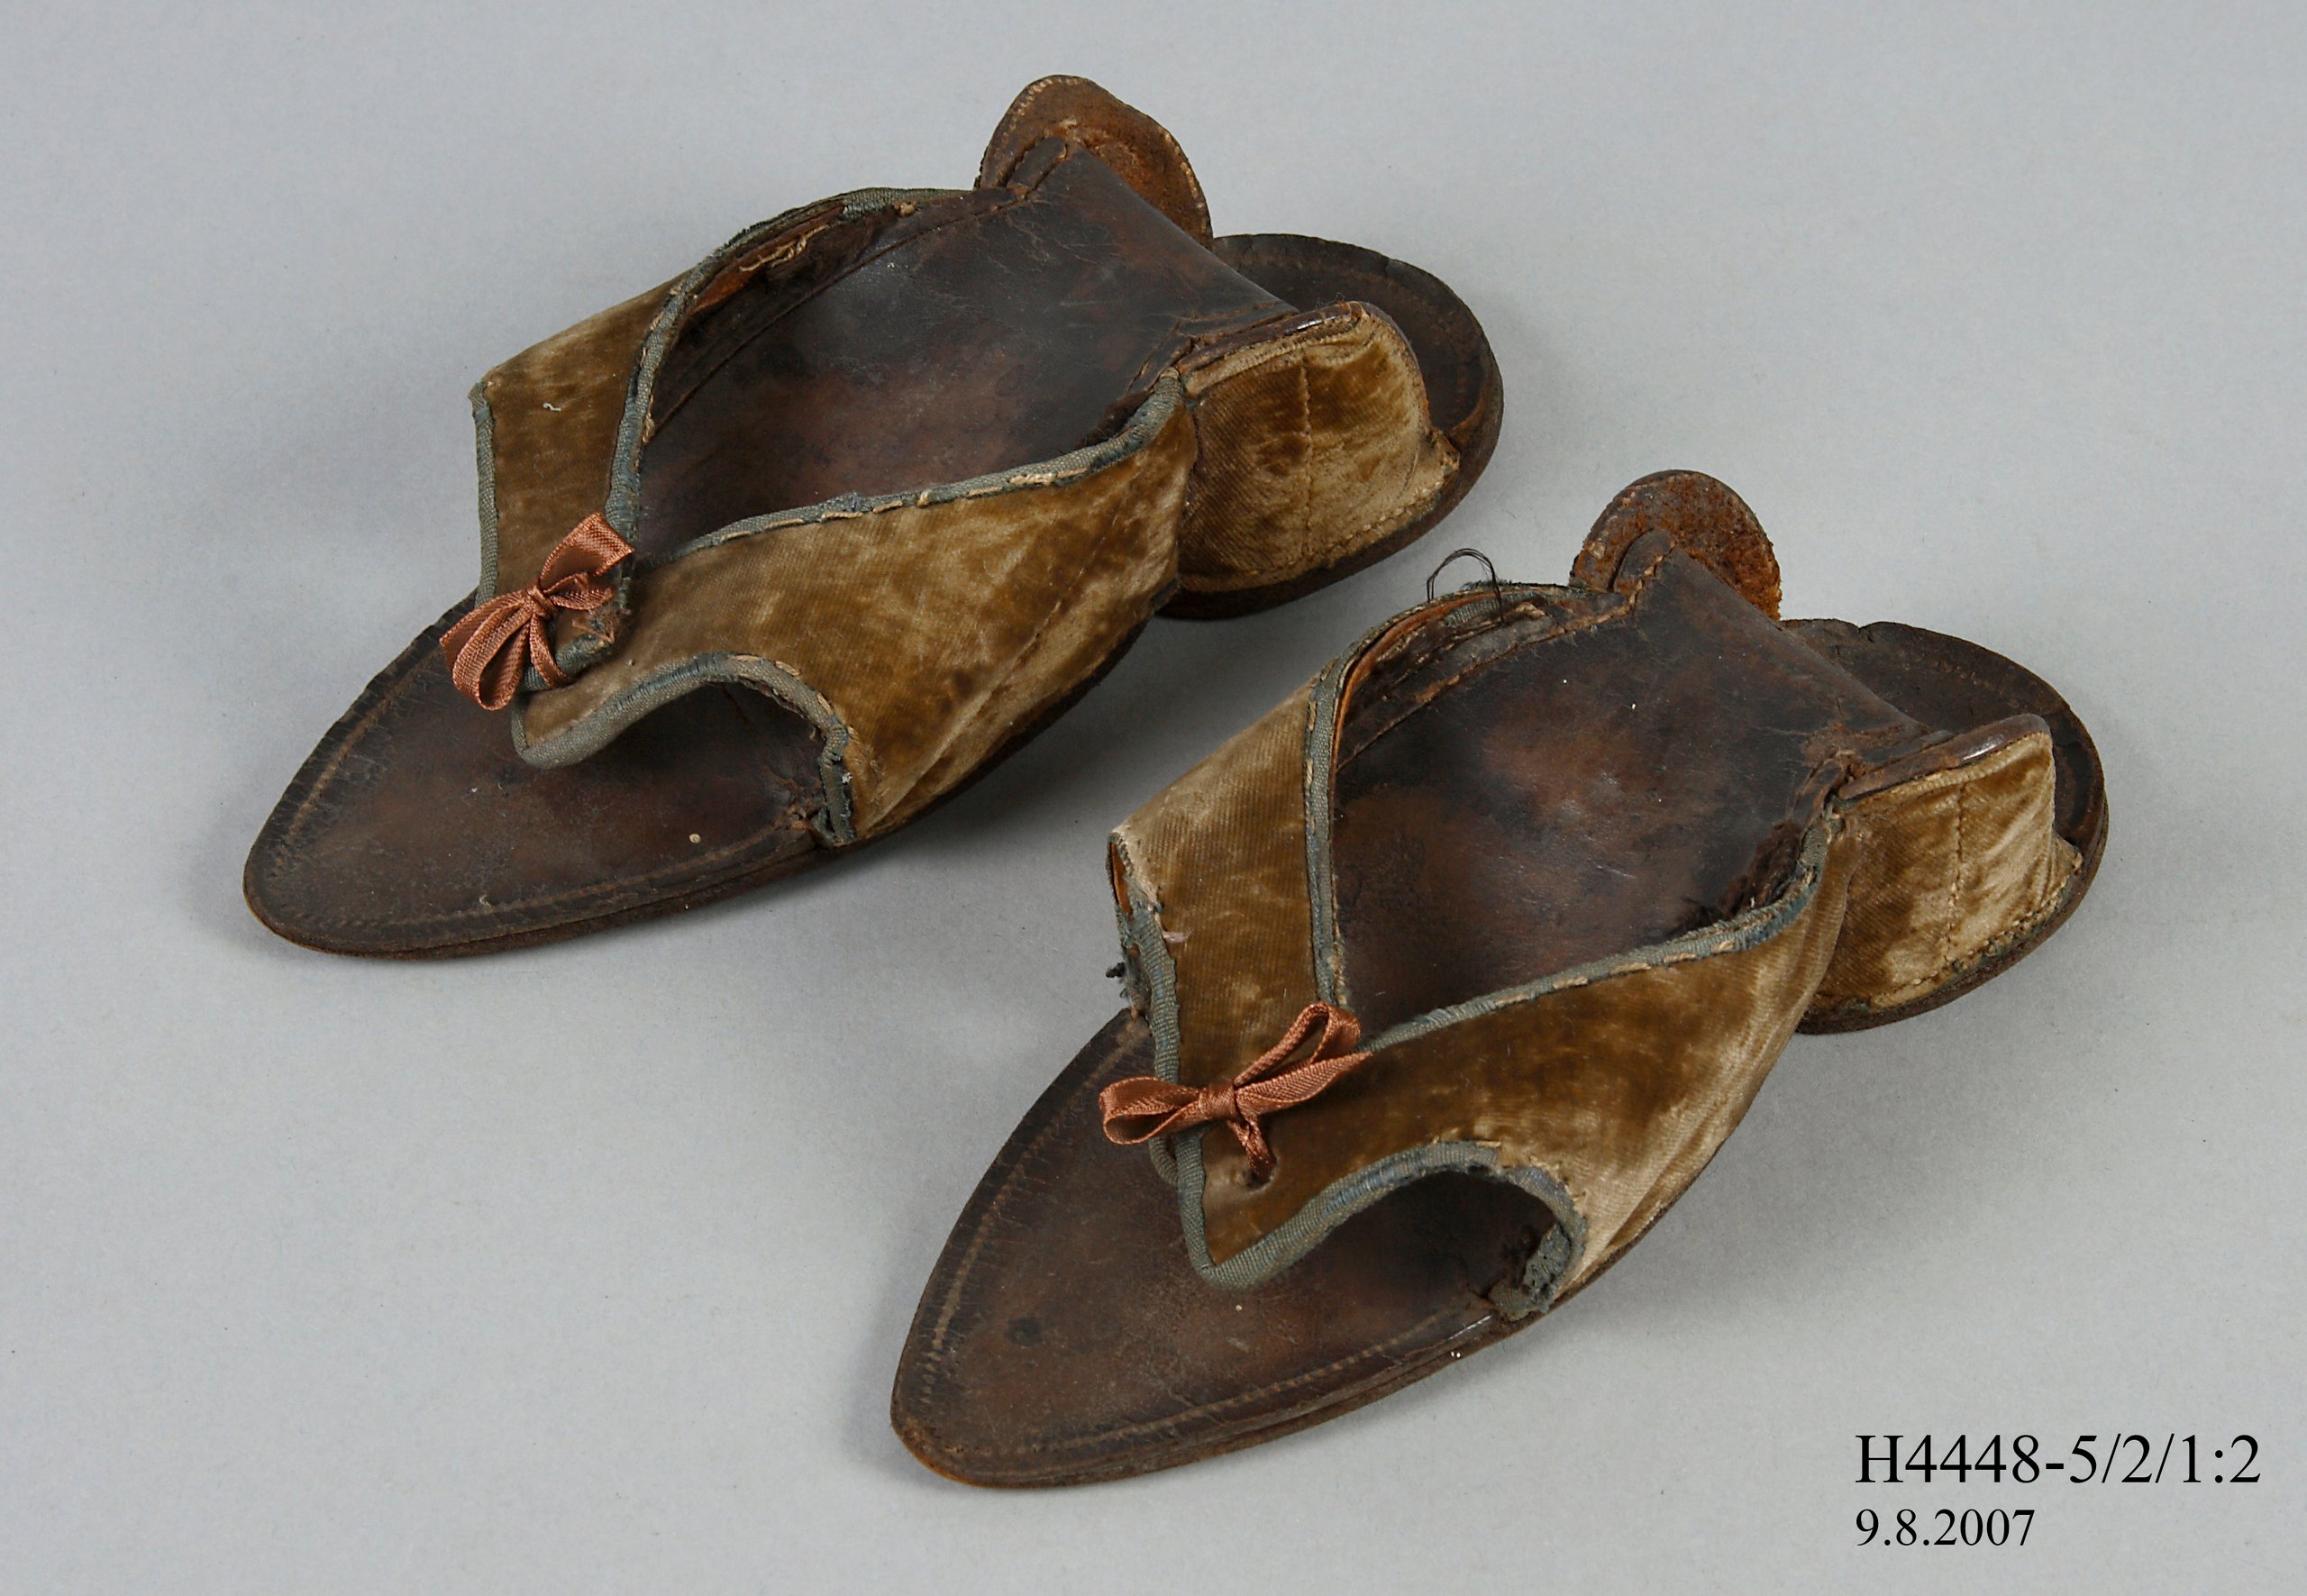 Clog overshoes from the Joseph Box collection